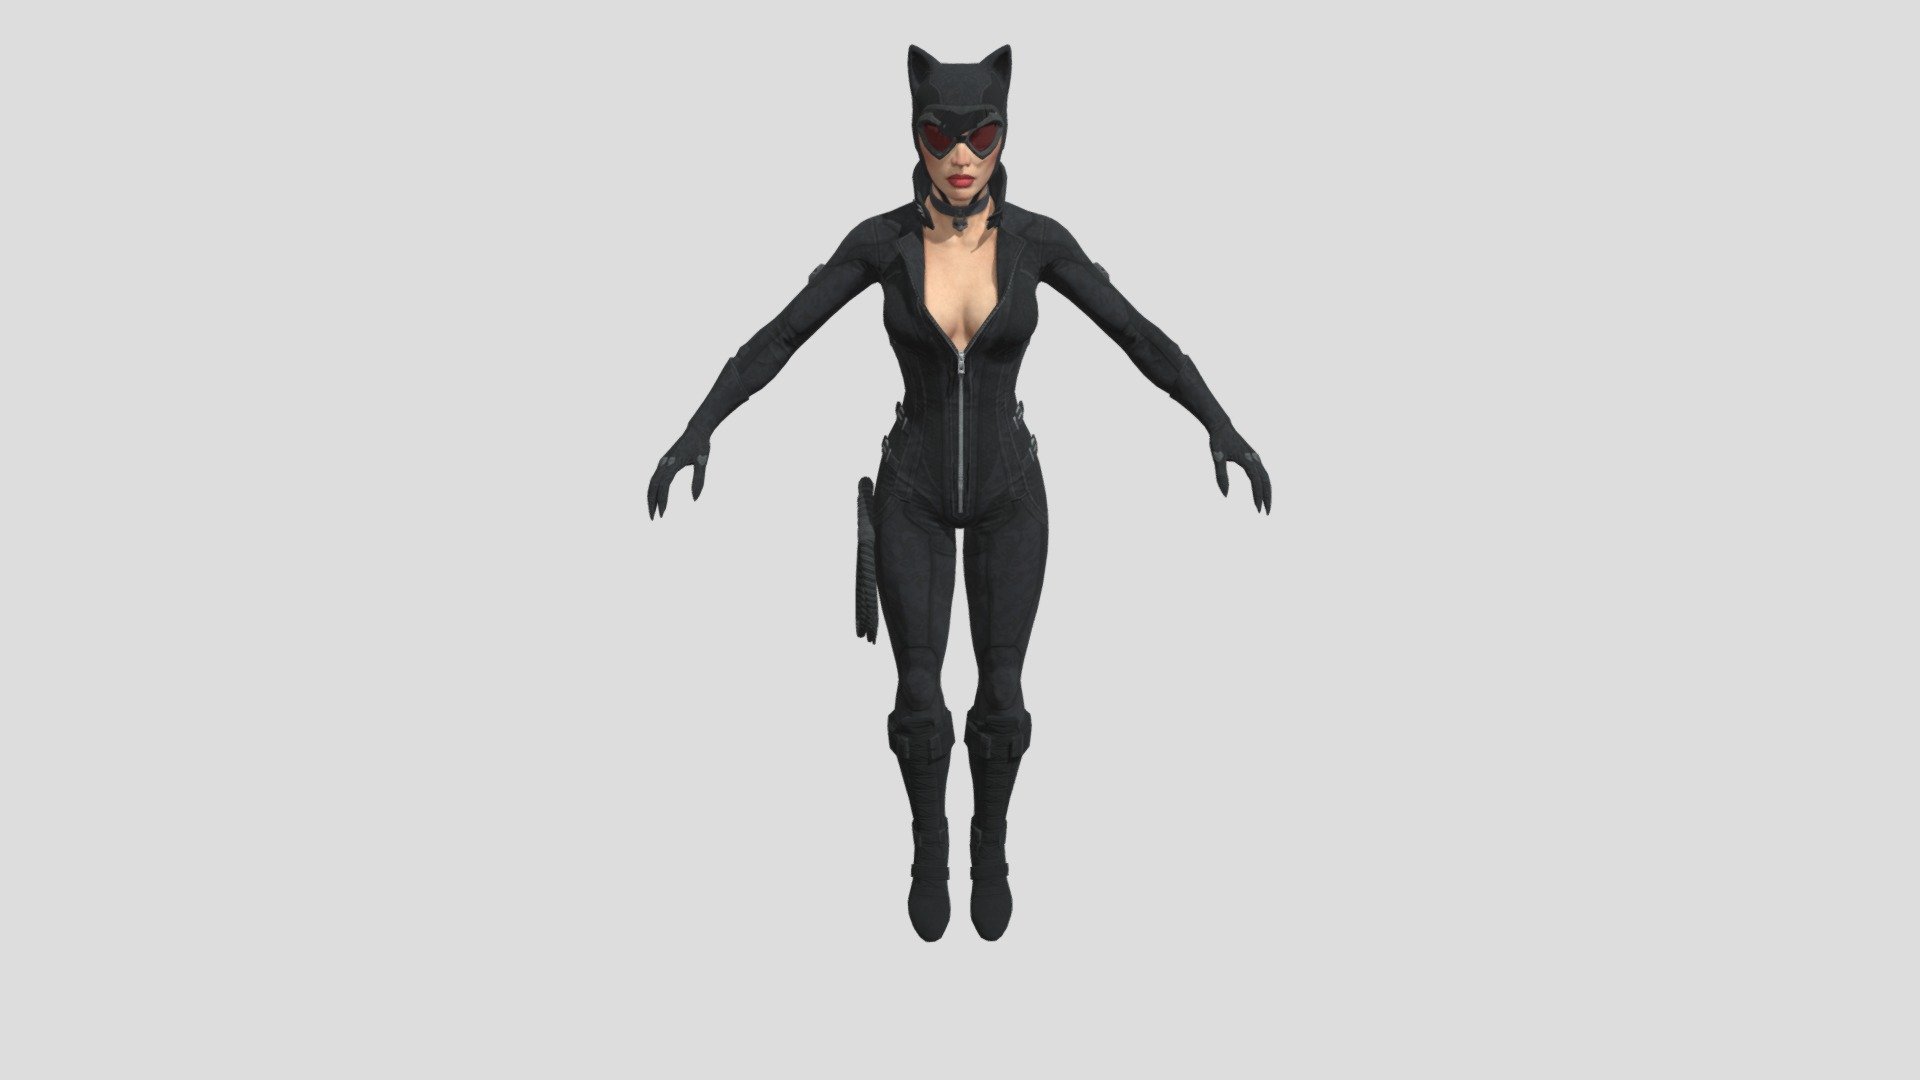 Batman Arkham City: Catwoman 3D Model free download by E.W. amazing games for Unity and Unreal Engne! - Batman Arkham City: Catwoman - Download Free 3D model by EWTube0 3d model